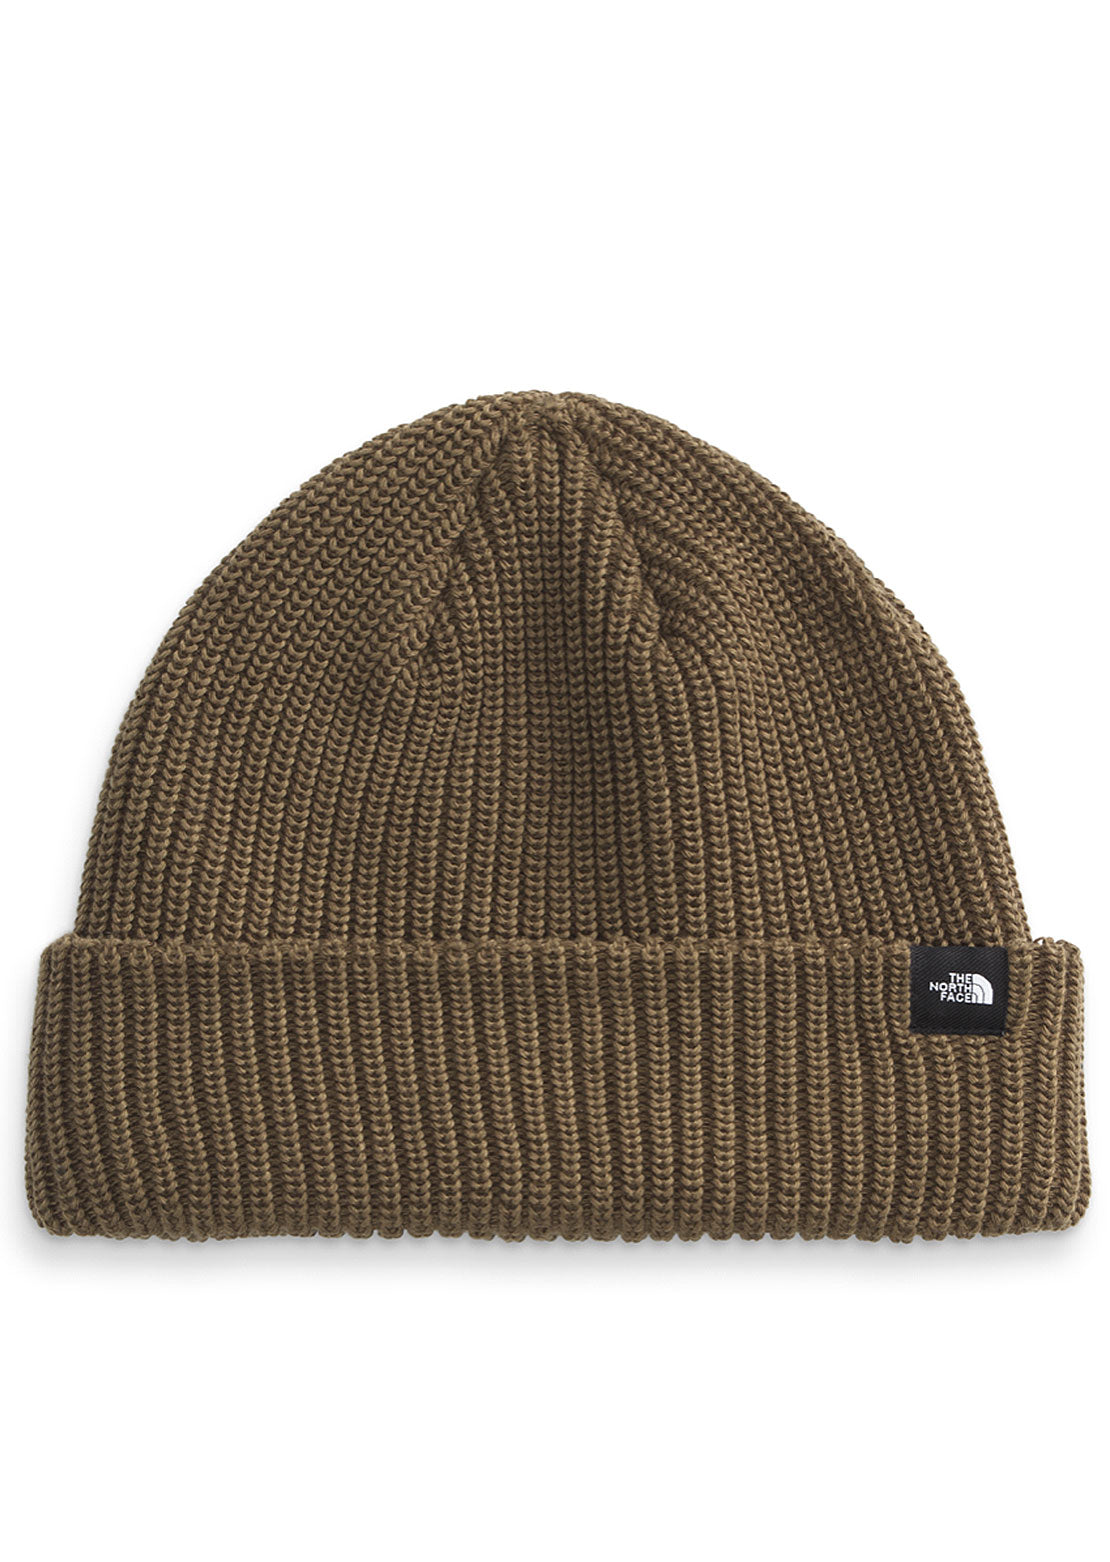 The North Face Fisherman Beanie - PRFO Sports